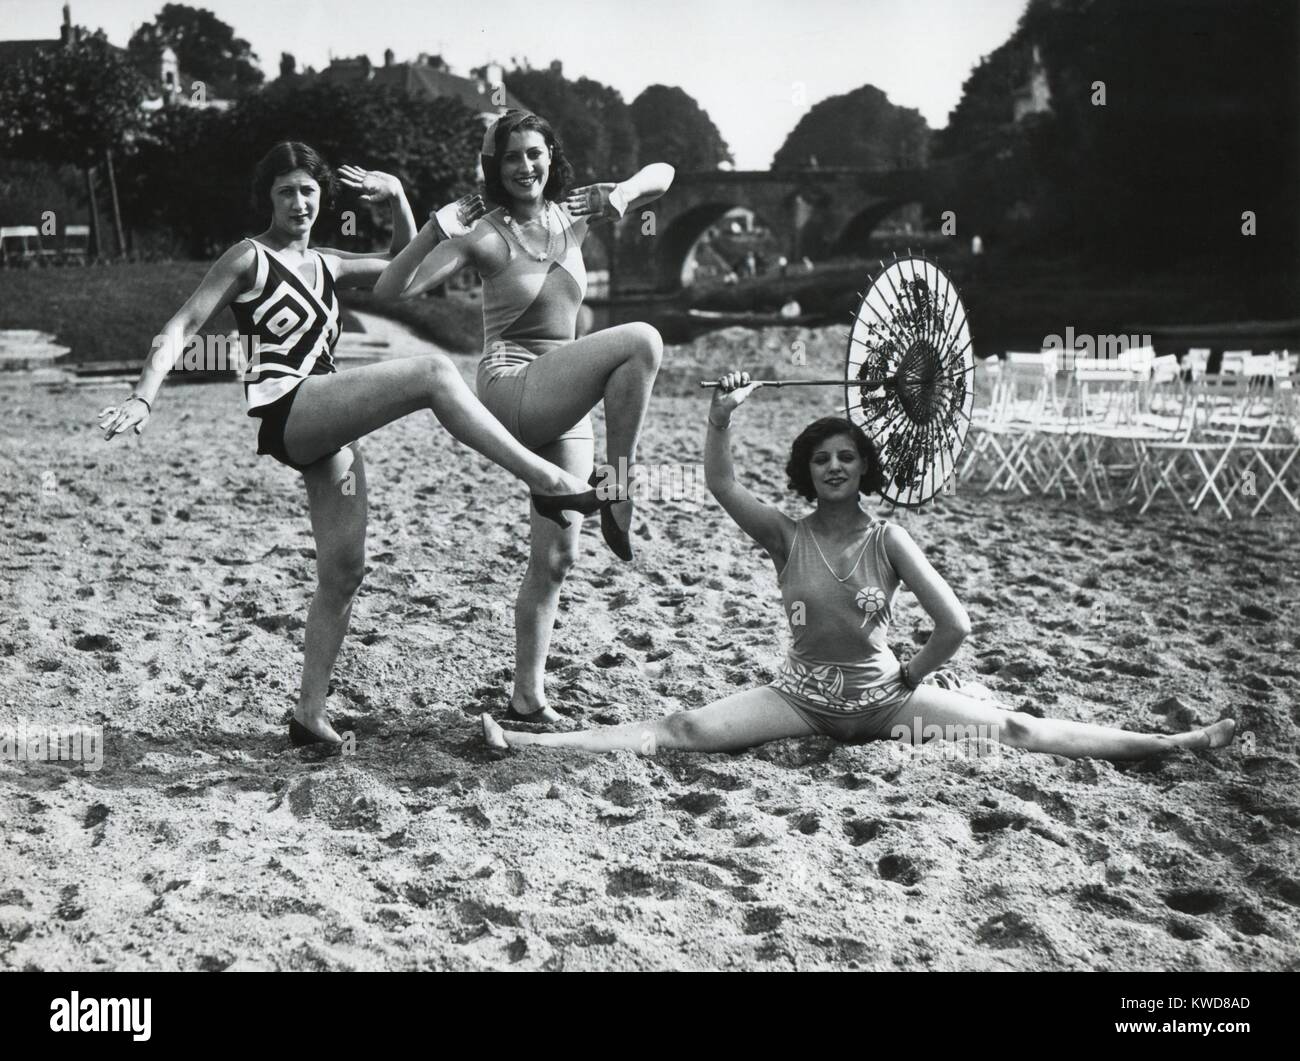 Acrobatic French women pose in the latest fashionable bathing